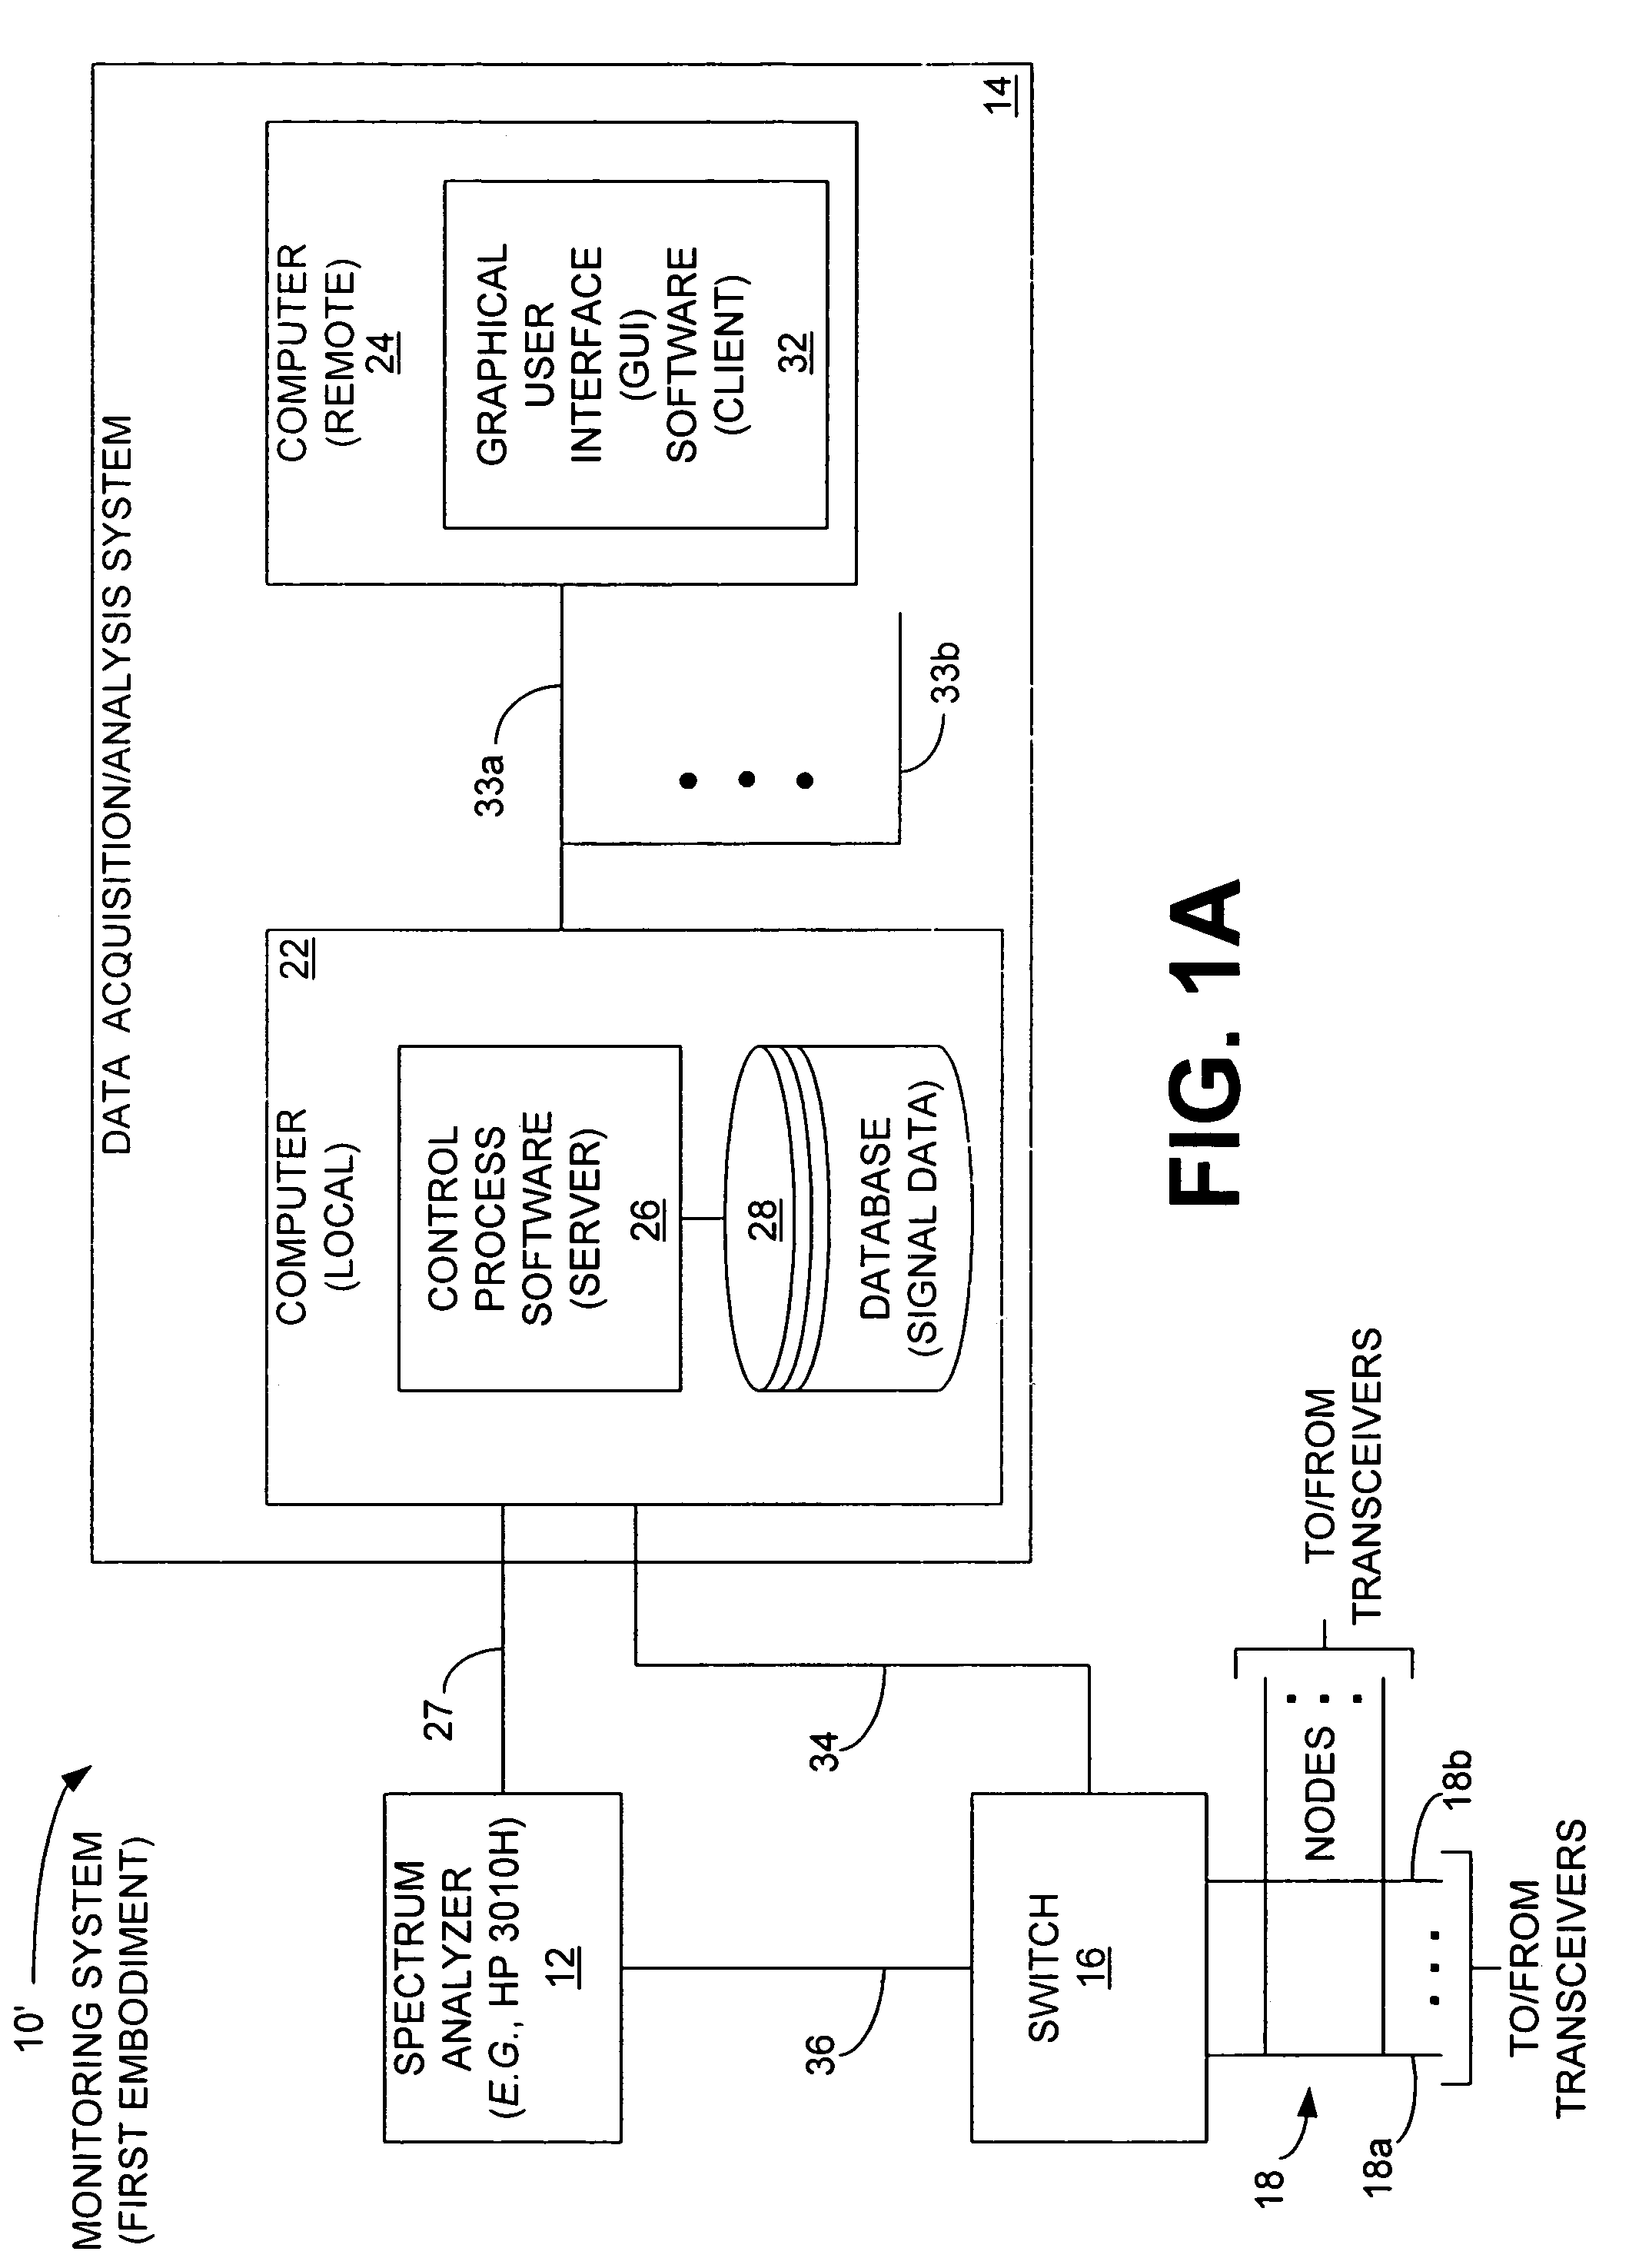 Monitoring system and method implementing test result display logic